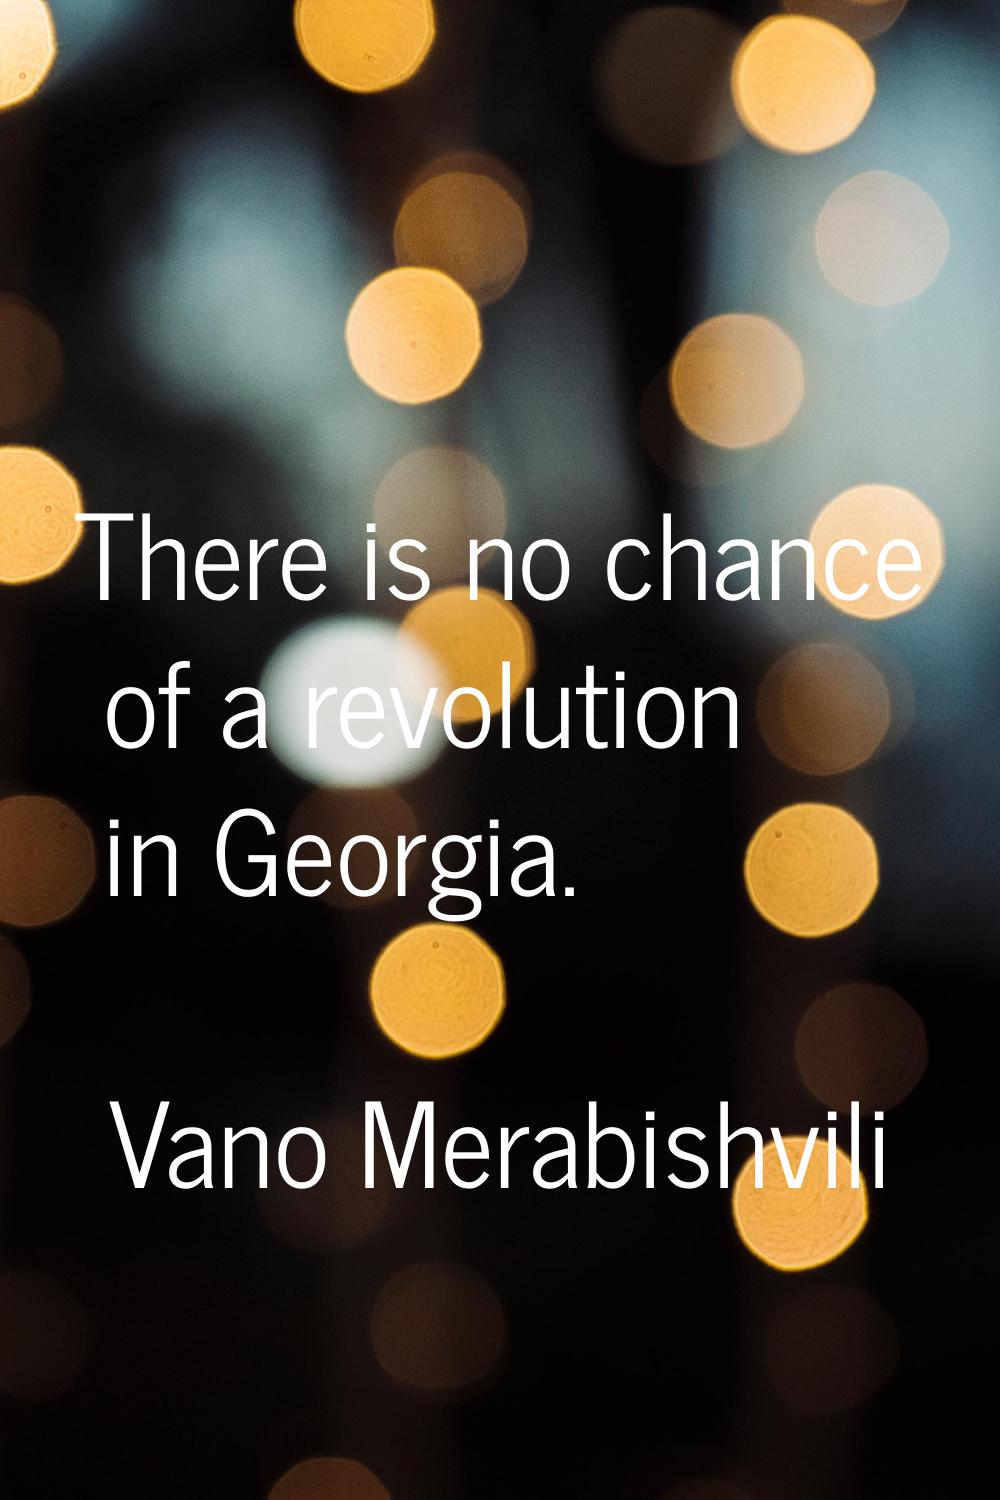 There is no chance of a revolution in Georgia.